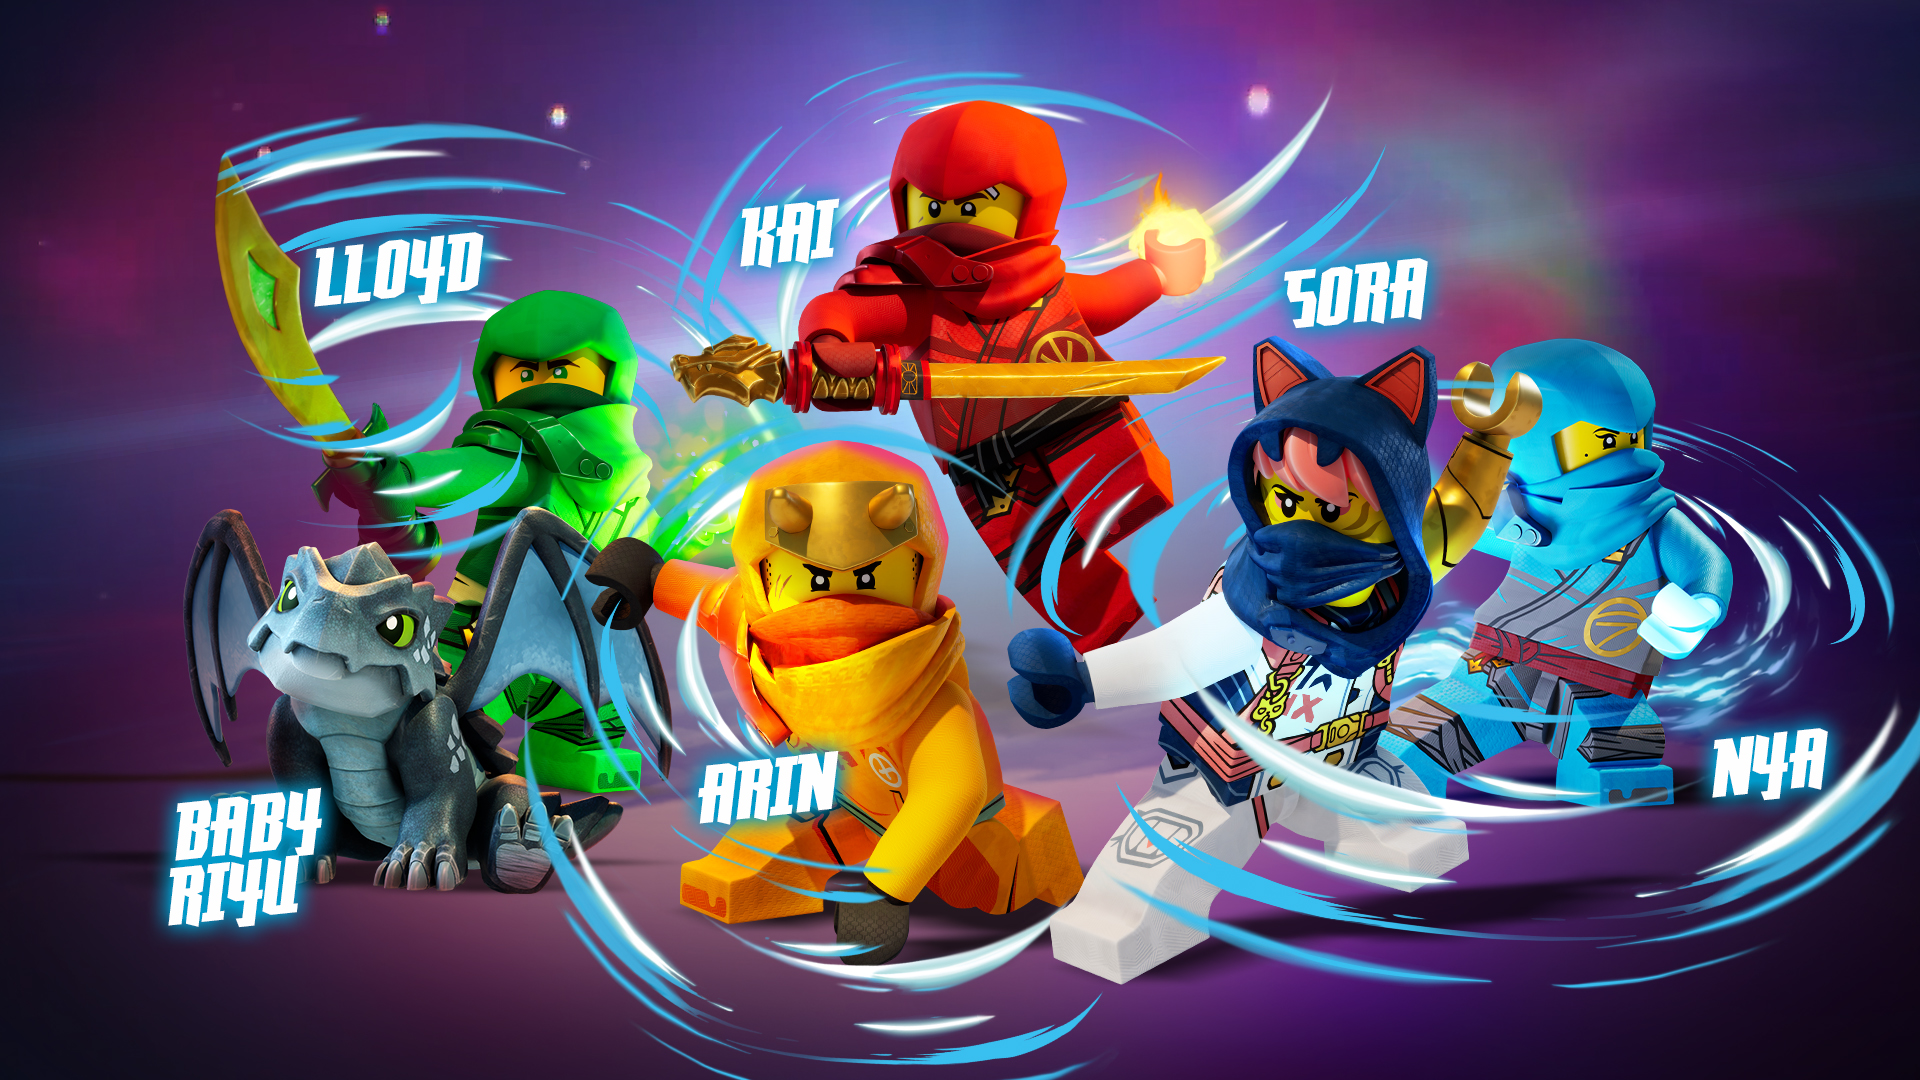 First look at completed LEGO Ninjago Dragons Rising poster, new